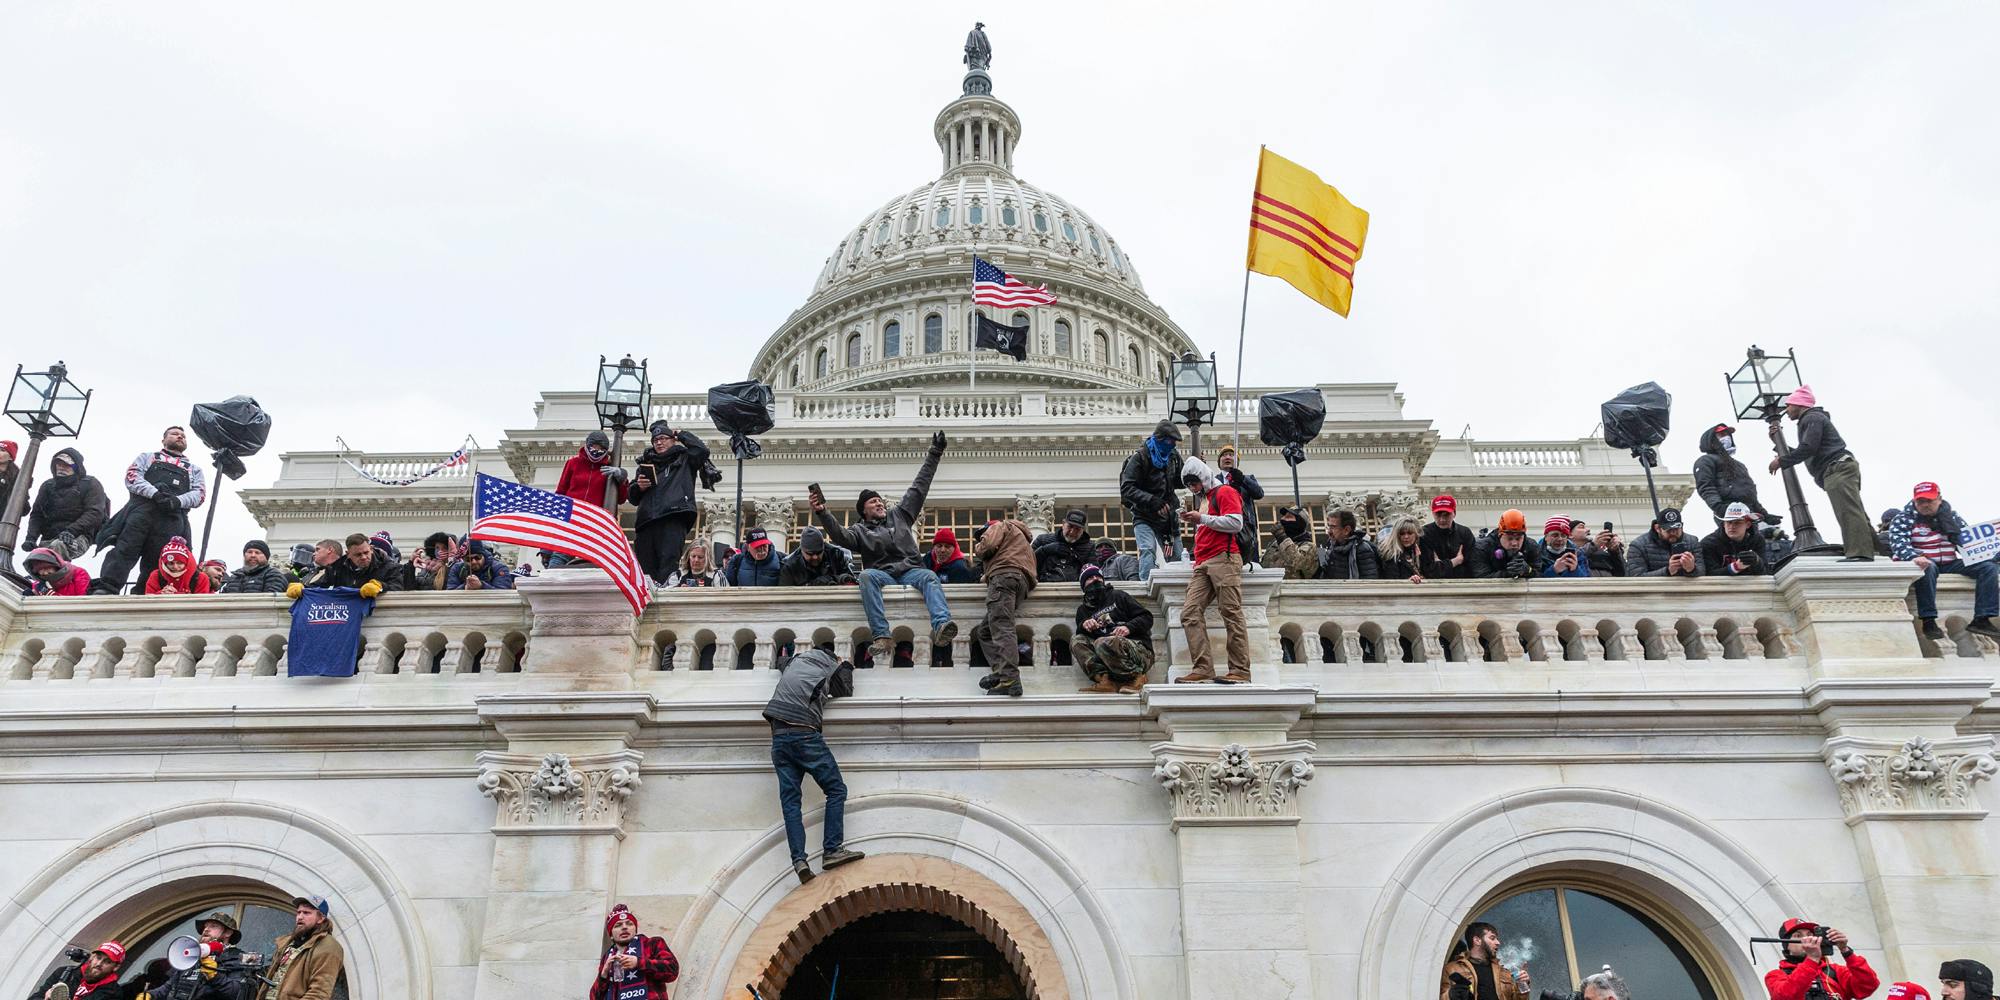 A photo from the January 6 capitol riot showing Trump supporters climbing the Capitol.